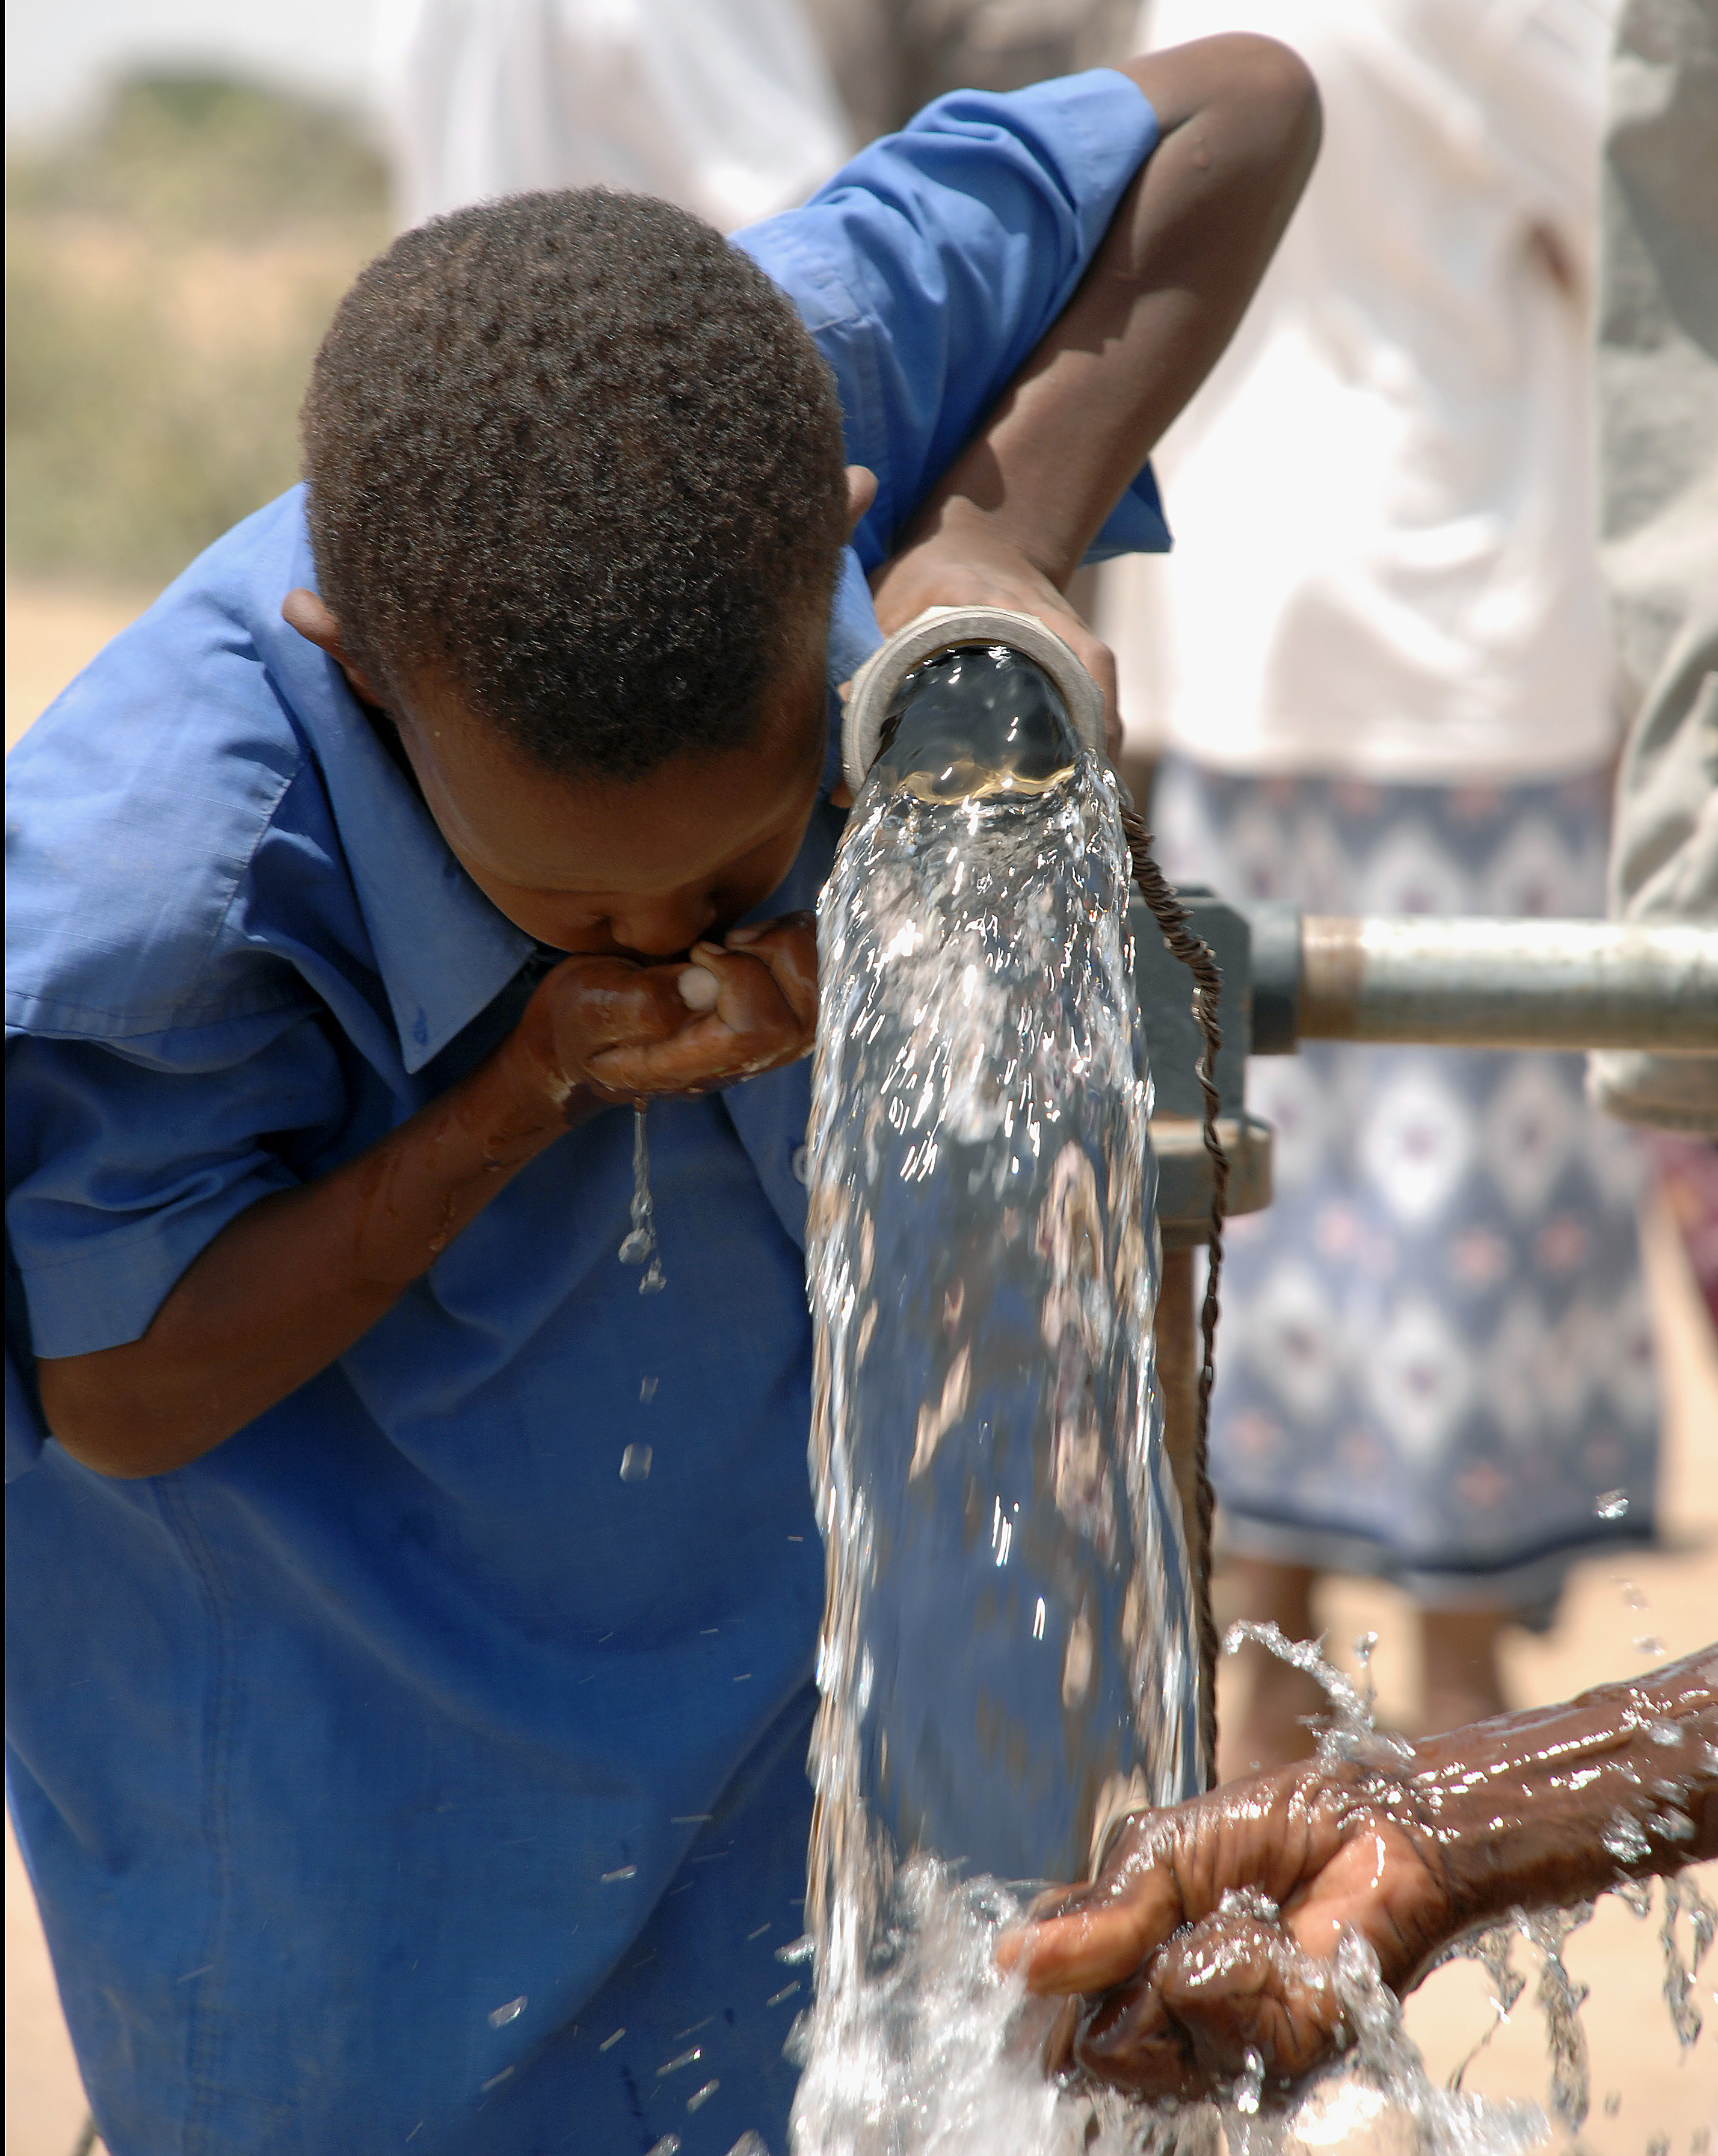 Child drinking from water pump